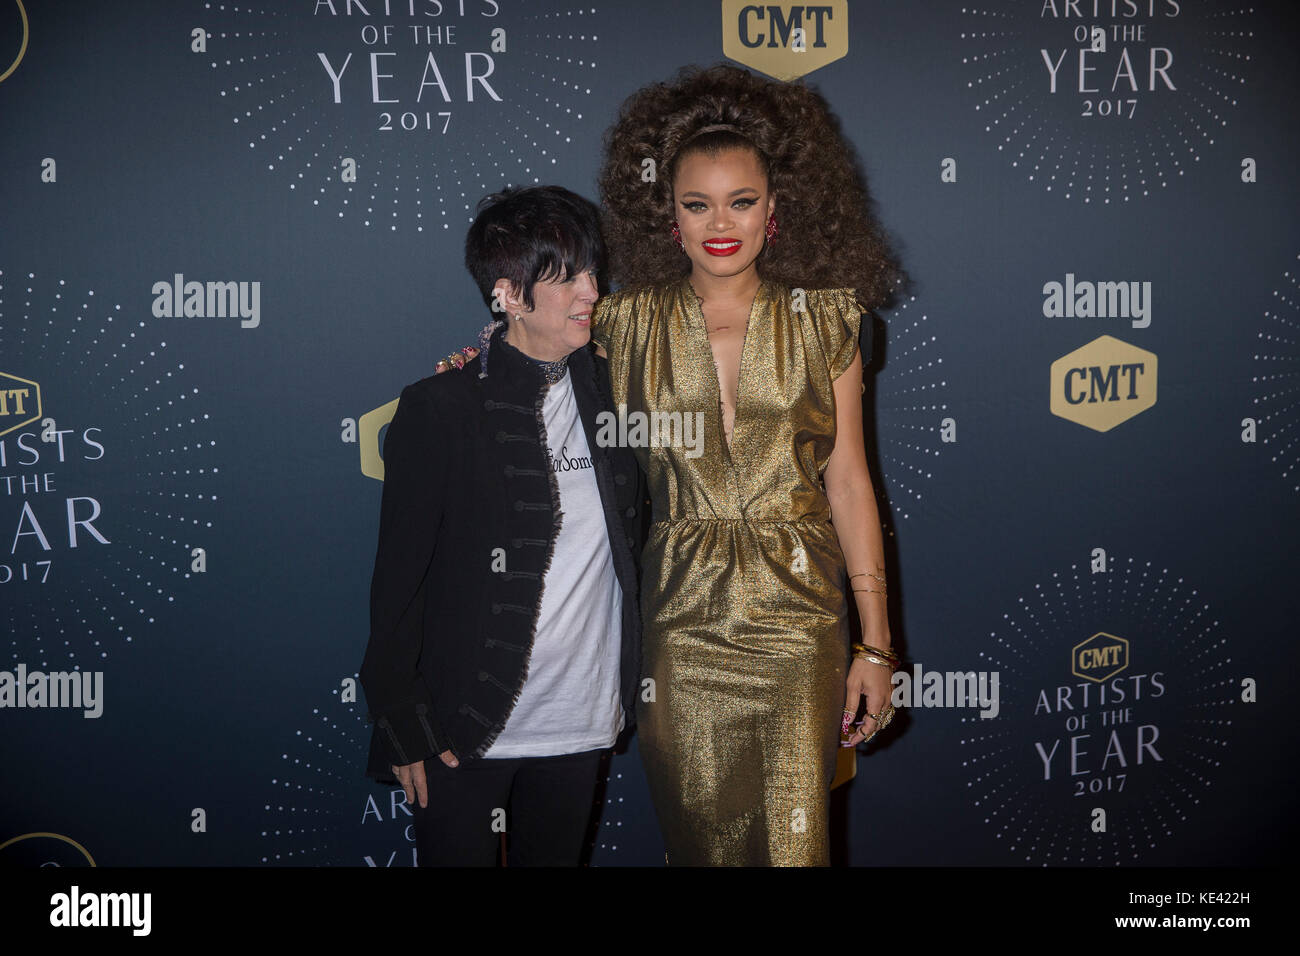 Nashville, Tenessee, USA. 18th Oct, 2017. NASHVILLE, TN - Dianne Warren and Andra Day arrive on the red carpet at the 2017 CMT Artists of the Year at the Schermerhorn Symphony Center in Nashville, TN. Credit: The Photo Access/Alamy Live News Stock Photo